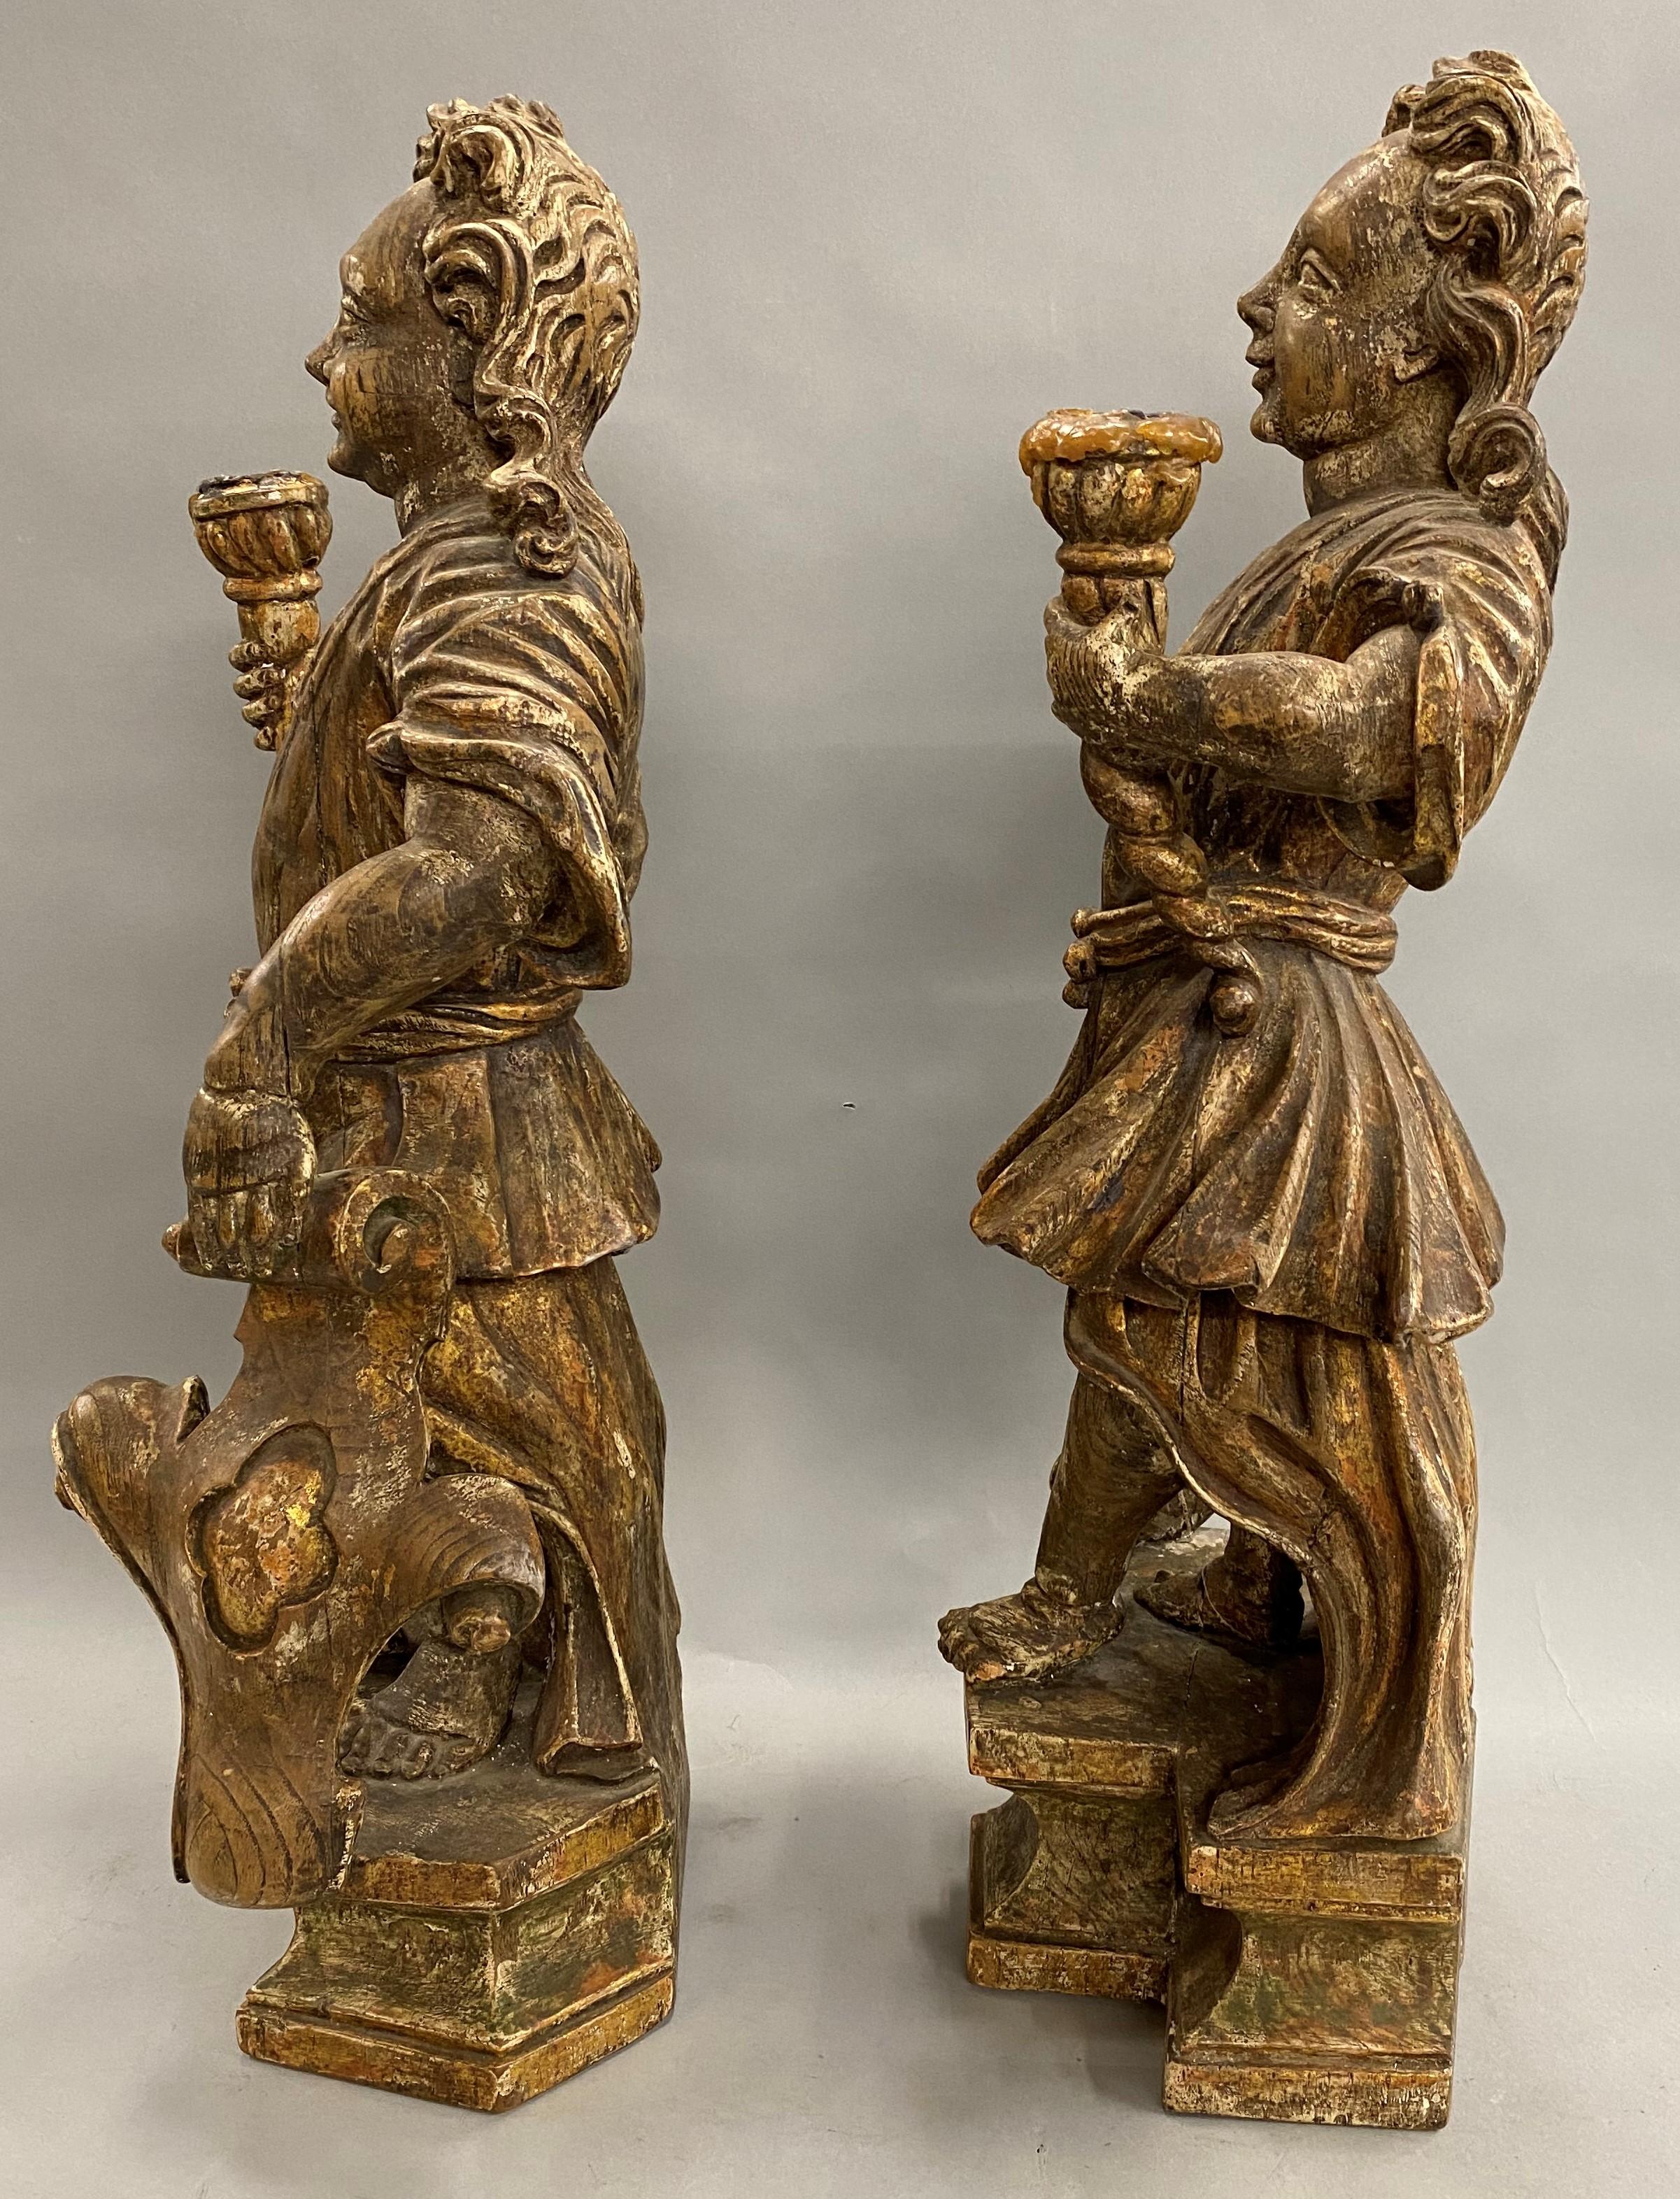 European Pair of 18th Century Continental Figural Carved Polychrome & Gilt Candle Holders For Sale